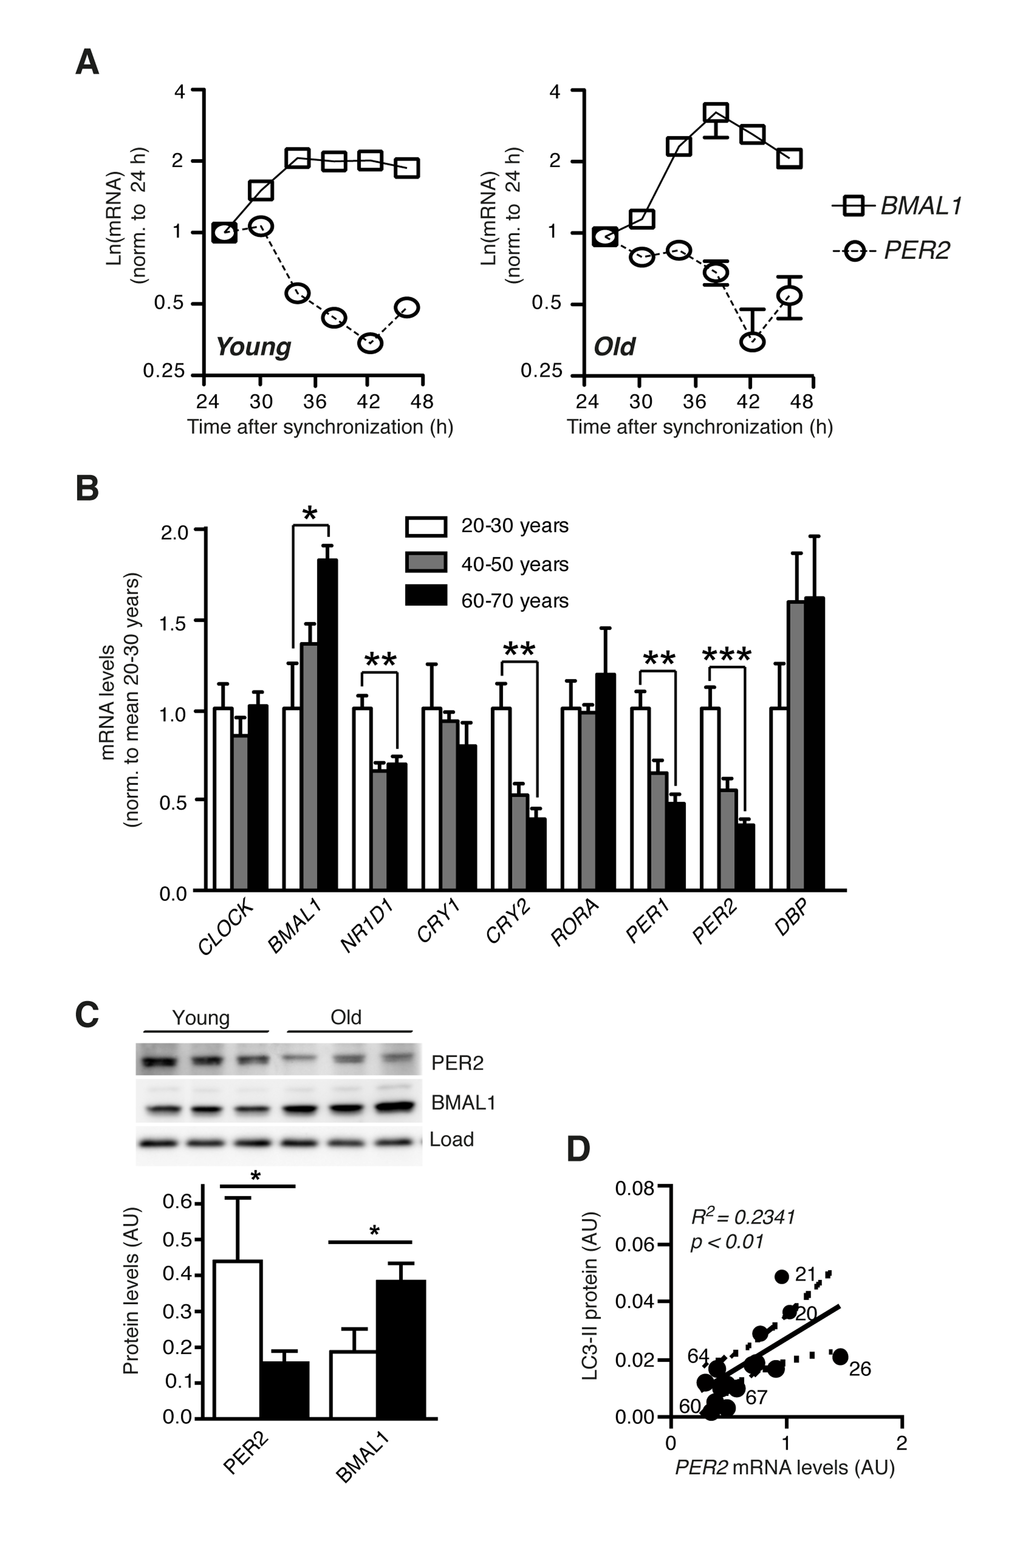 Clock gene expression is deregulated in aged primary human fibroblasts. (A) Circadian expression of Bmal1 mRNA (squares) and Per2 mRNA (circles) in primary human dermal fibroblasts from one young (age 21) and one old (age 67) donor of the cohort. (B) mRNA levels of core clock genes in cell lines from differently aged donors. Data obtained for age groups 20-30 years (white), 40-50 years (grey) and 60-70 years (black) are shown as mean ± SEM of five individual donors per age group. Data are normalised to the mean of age group 20-30 years. Asterisks indicate statistically significant differences between age groups 20-30 years and 60-70 years (unpaired t-test, two-tailed). (C) PER2 and BMAL1 protein levels in age groups 20-30 years (white) and 60-70 years (black). (D) Correlation of PER2 mRNA expression with LC3-II protein levels in the same cell lines. Solid and dashed lines indicate the linear regression curve and the 95% confidence band. Numbers next to data points show donor ages. Data are shown as mean values ± SEM, n=4.